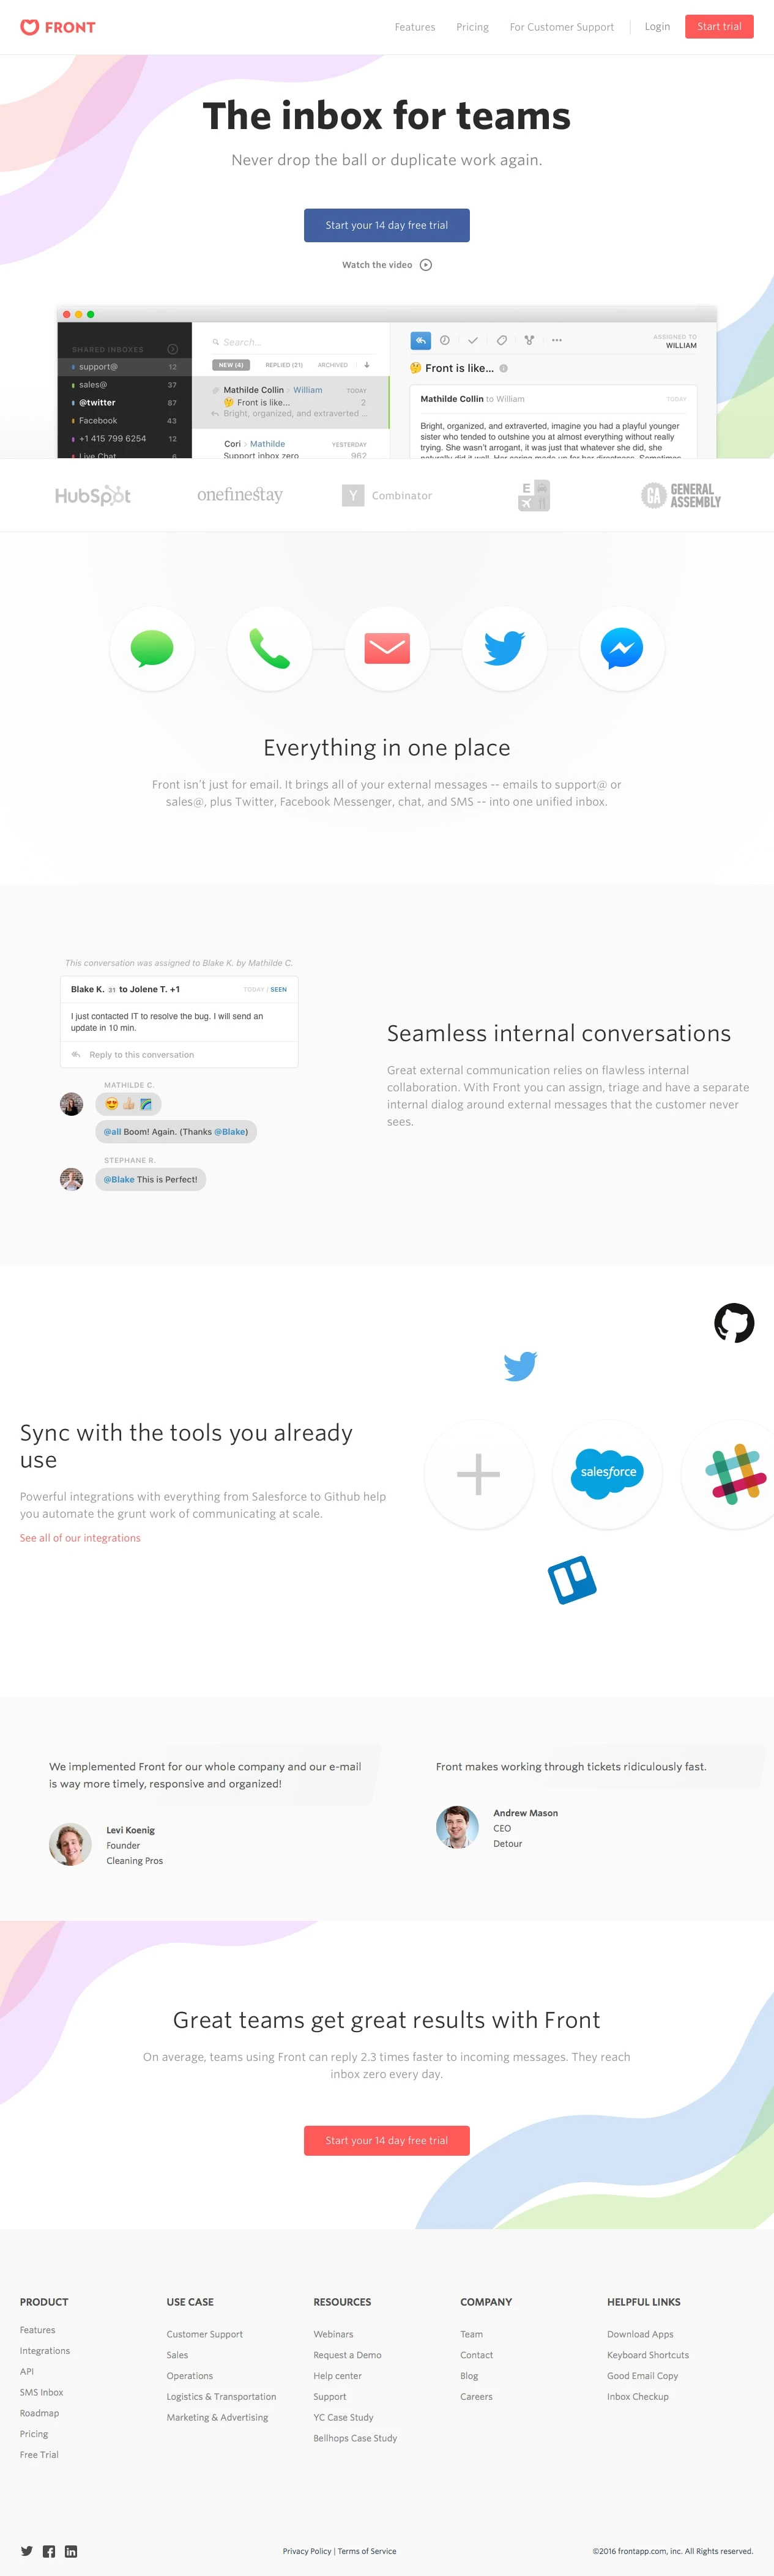 Front Landing Page Example: Everything in one place Front isn’t just for email. It brings all of your external messages -- emails to support@ or sales@, plus Twitter, Facebook Messenger, chat, and SMS -- into one unified inbox.